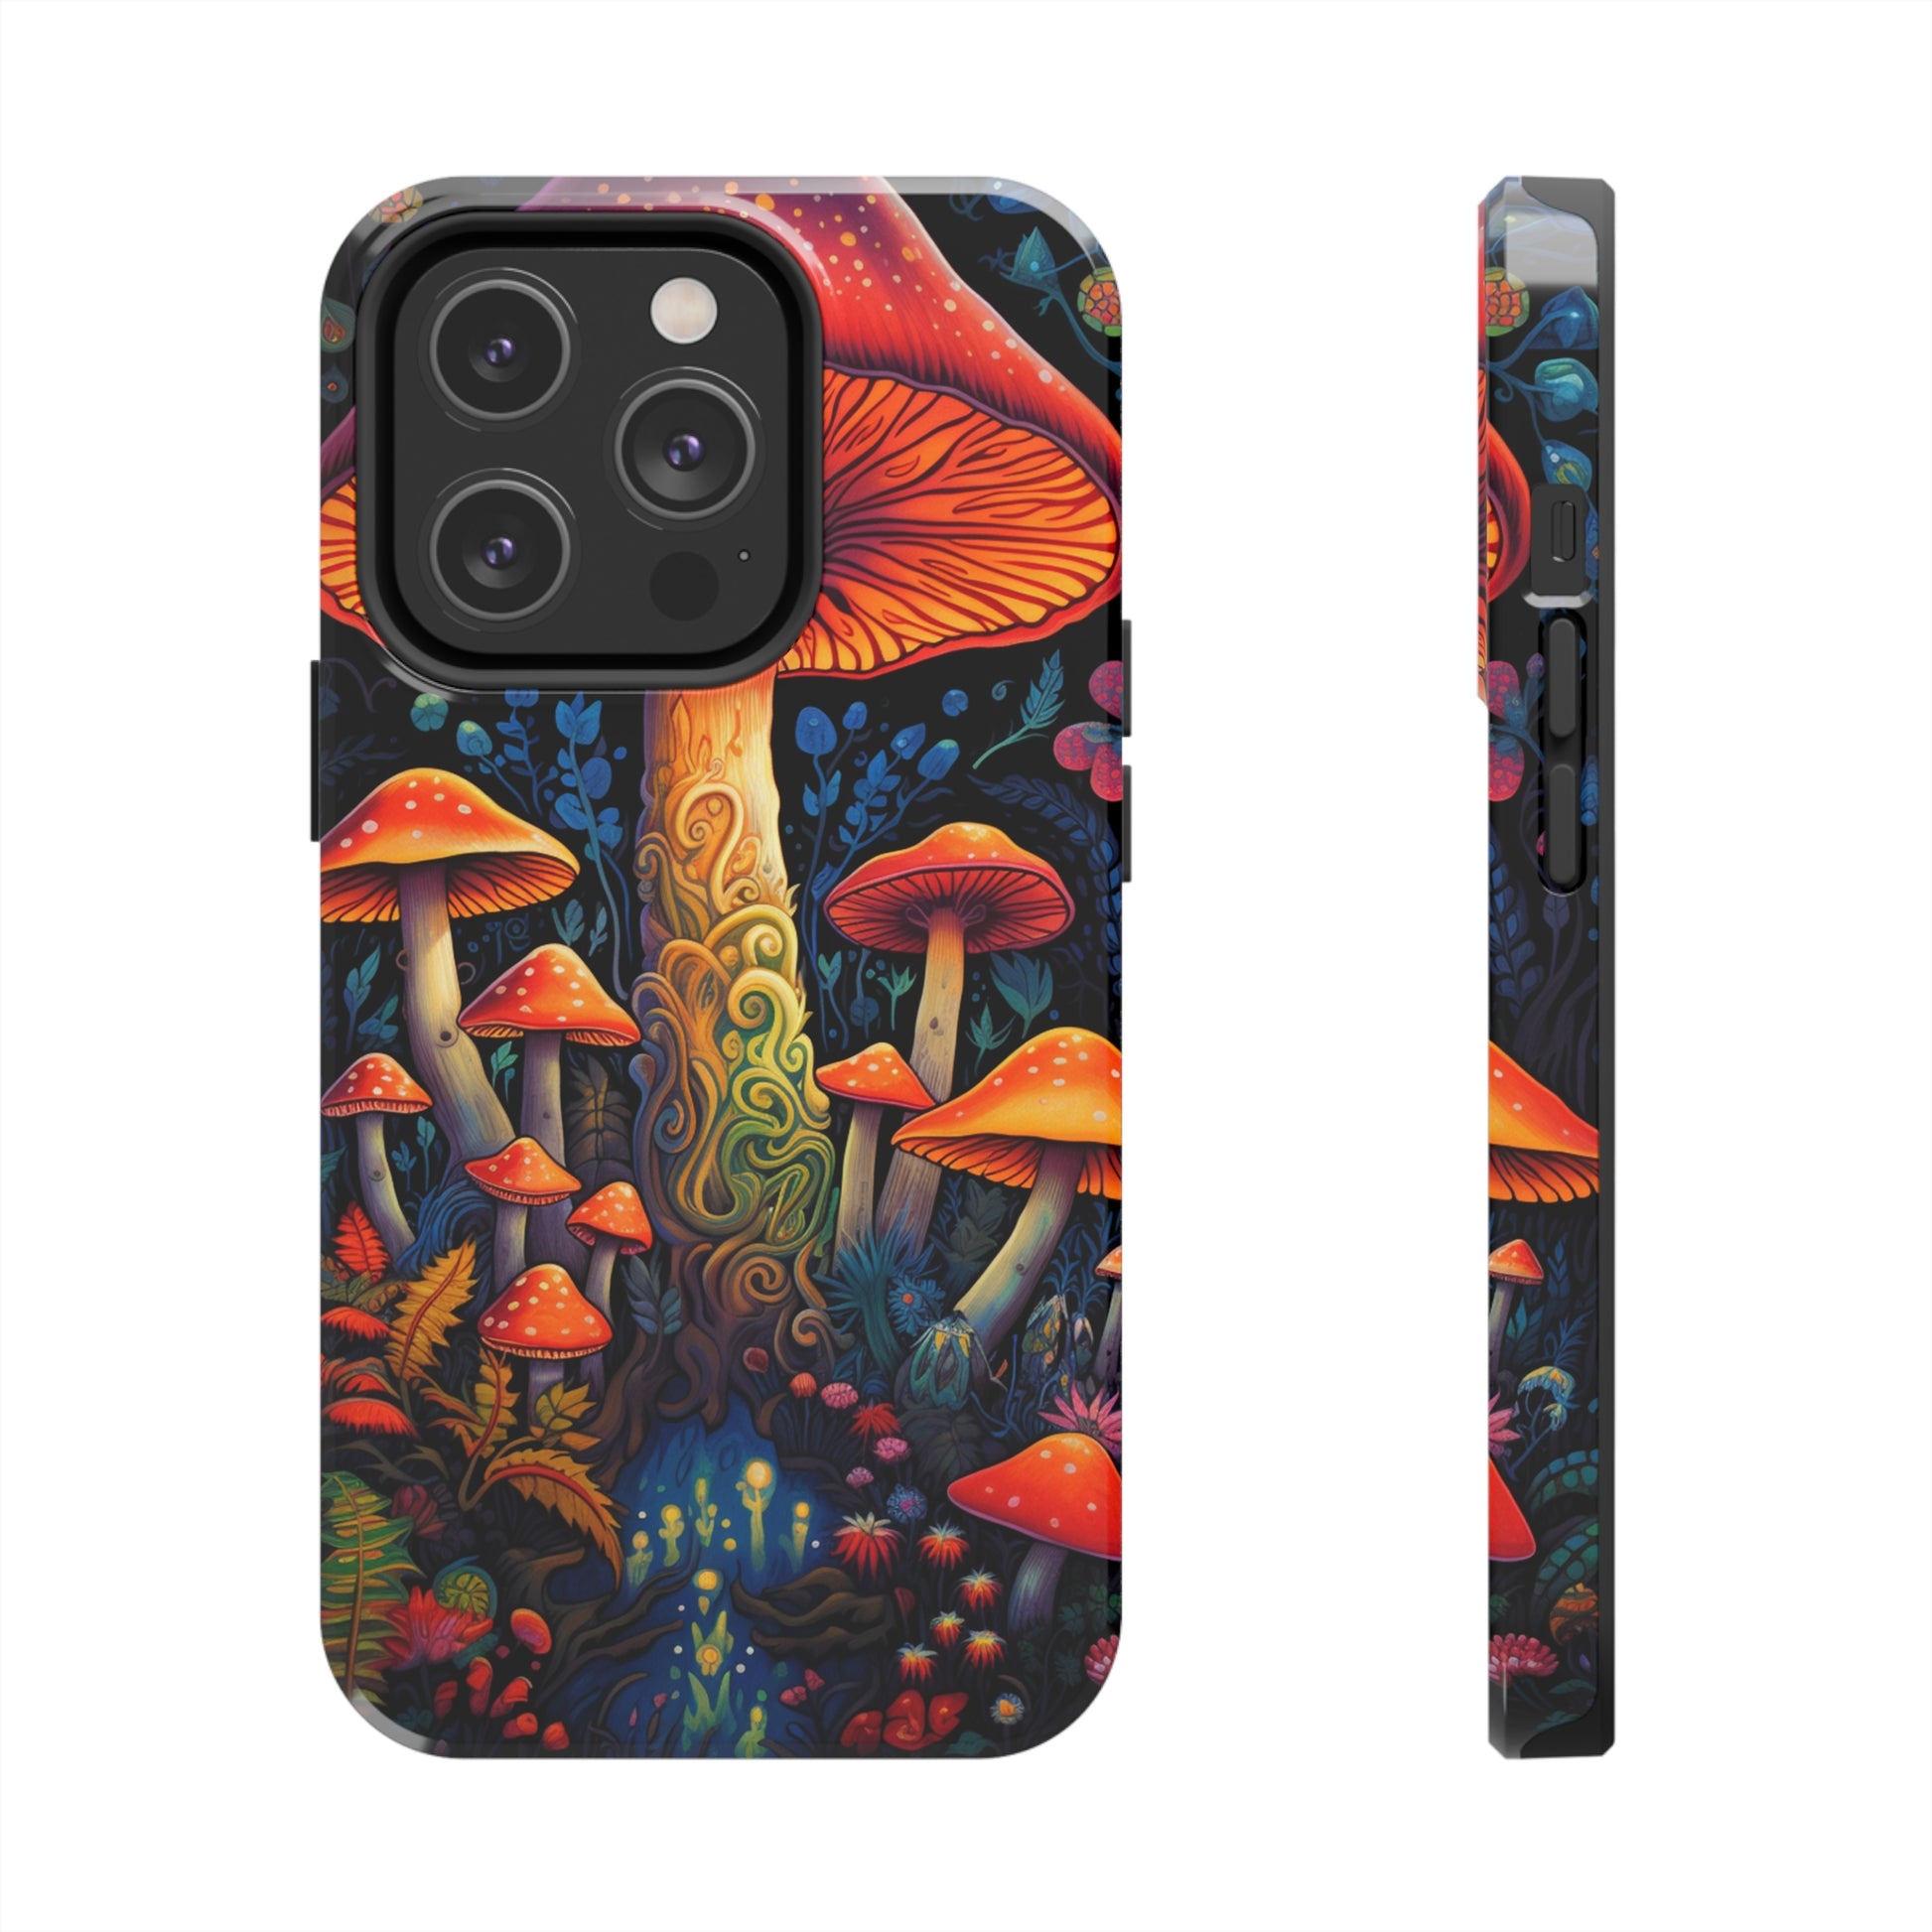 Tough Case with Vibrant and Mesmerizing Patterns